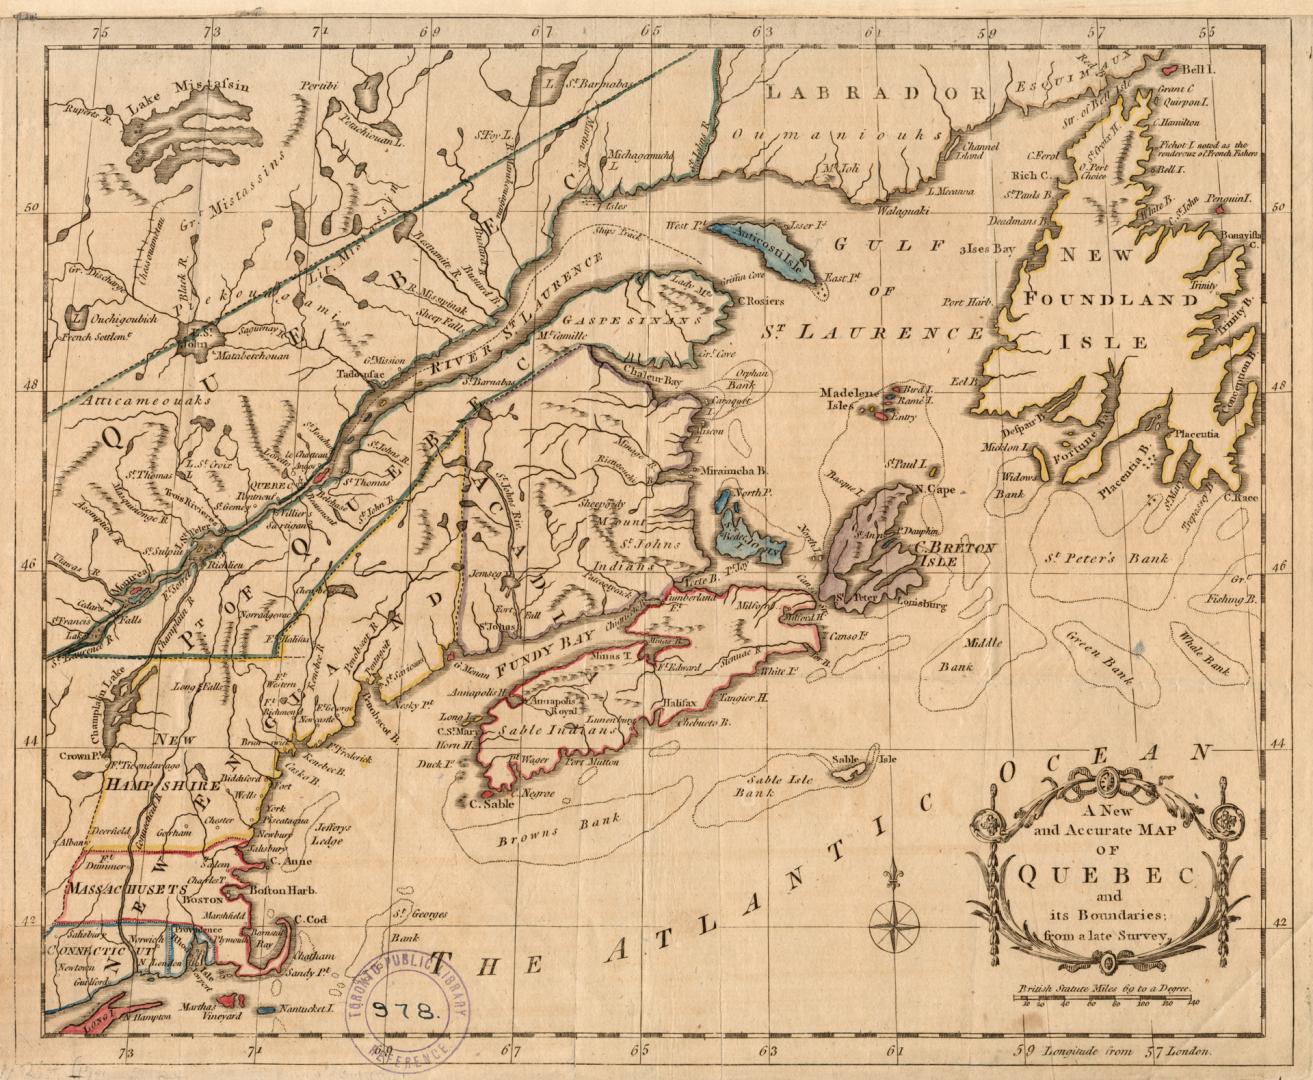 A new and accurate map of Québec and its boundaries from a late survey